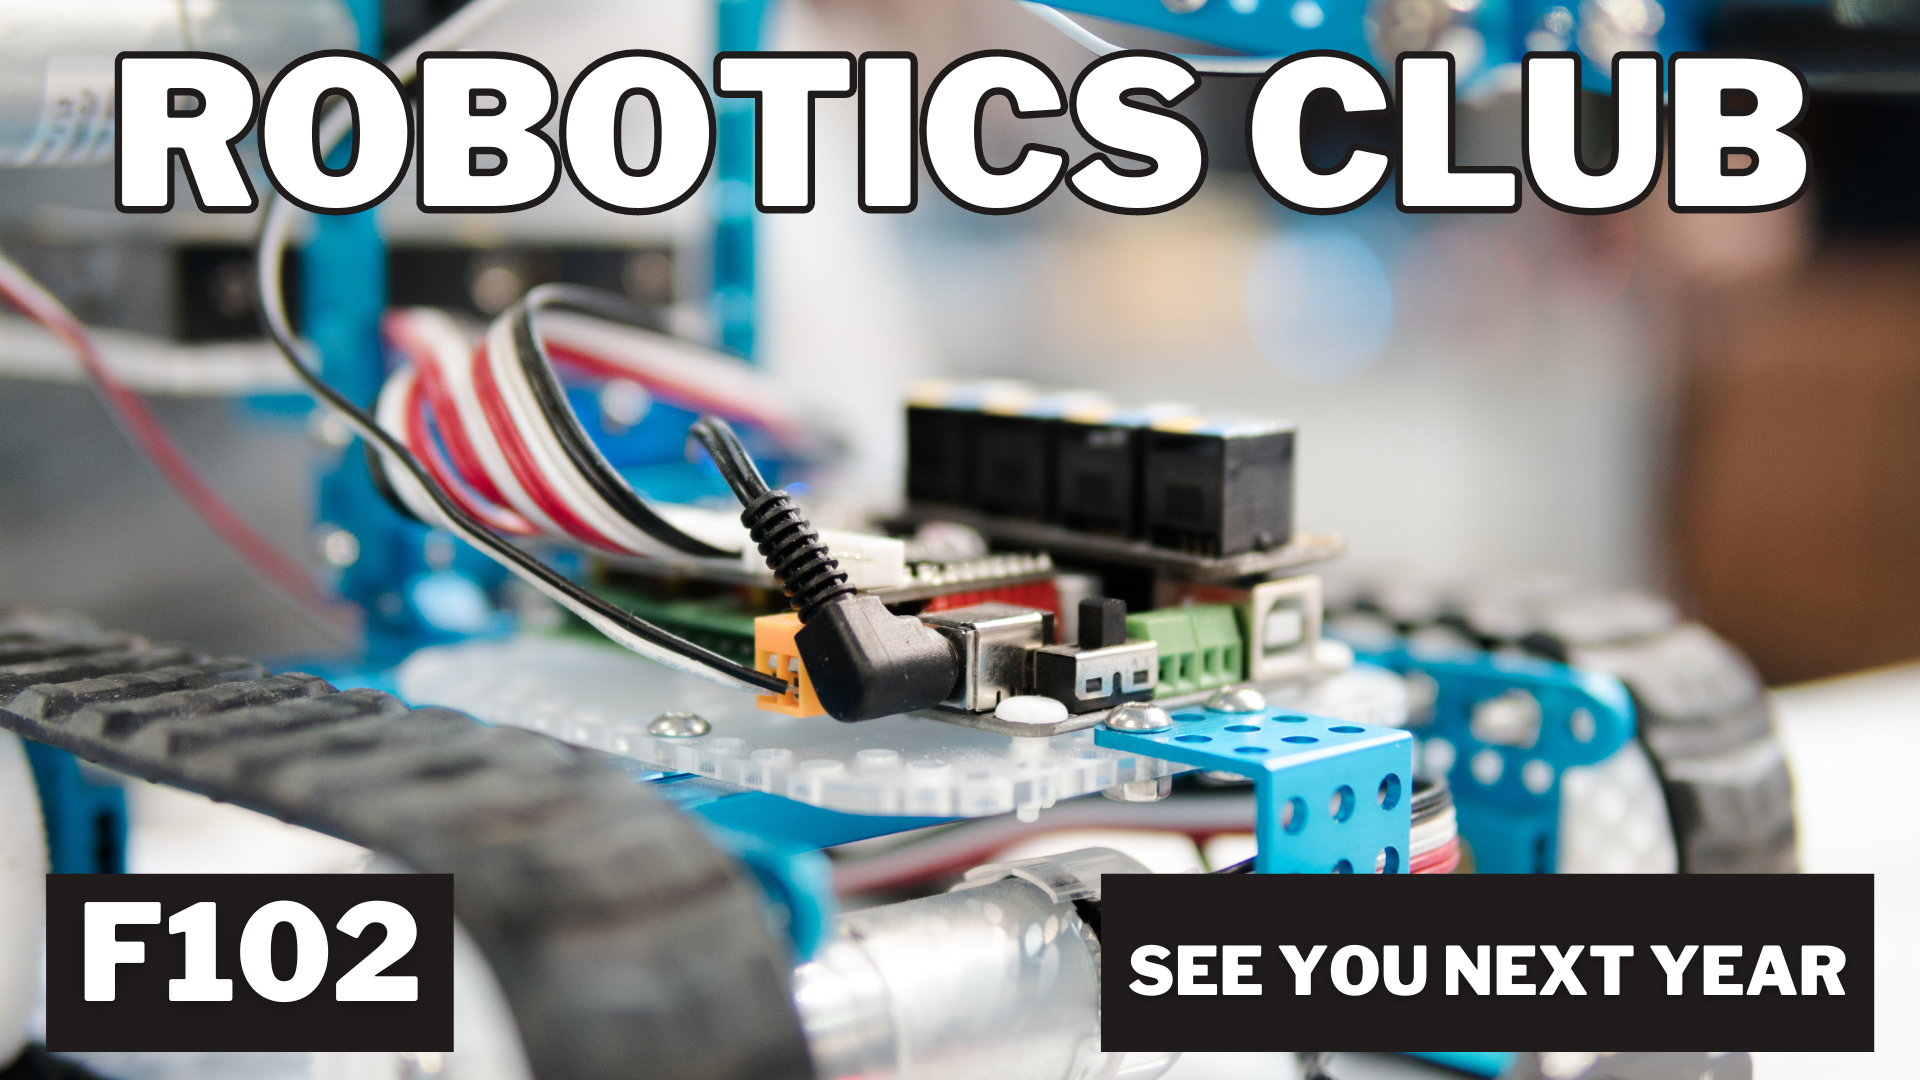 Robotics meets in room F102, See you next year